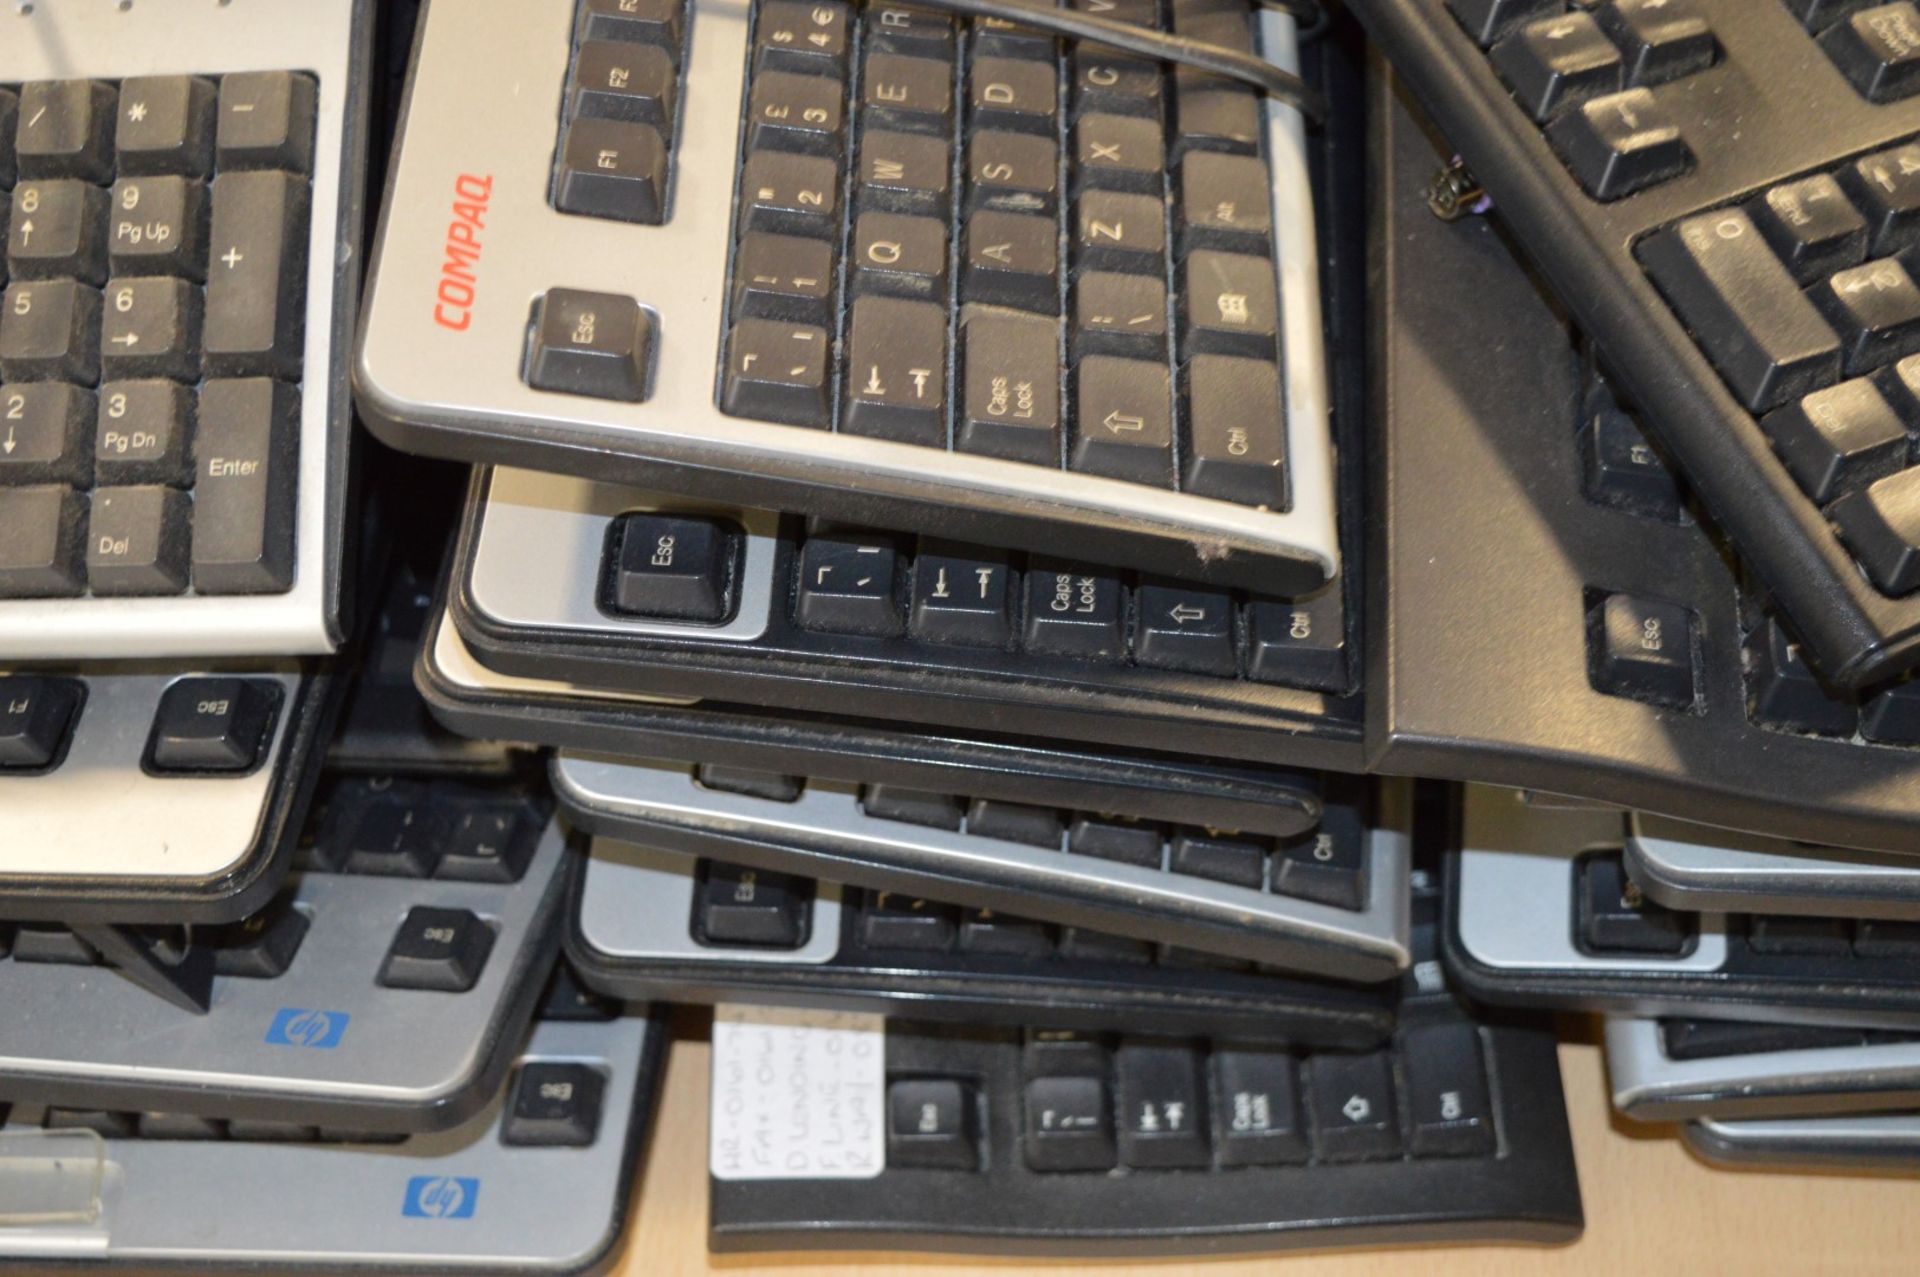 30 x Desktop Computer Keyboards - Generic, HP, Compaq - From Working Office Environment - Ref - Image 4 of 4